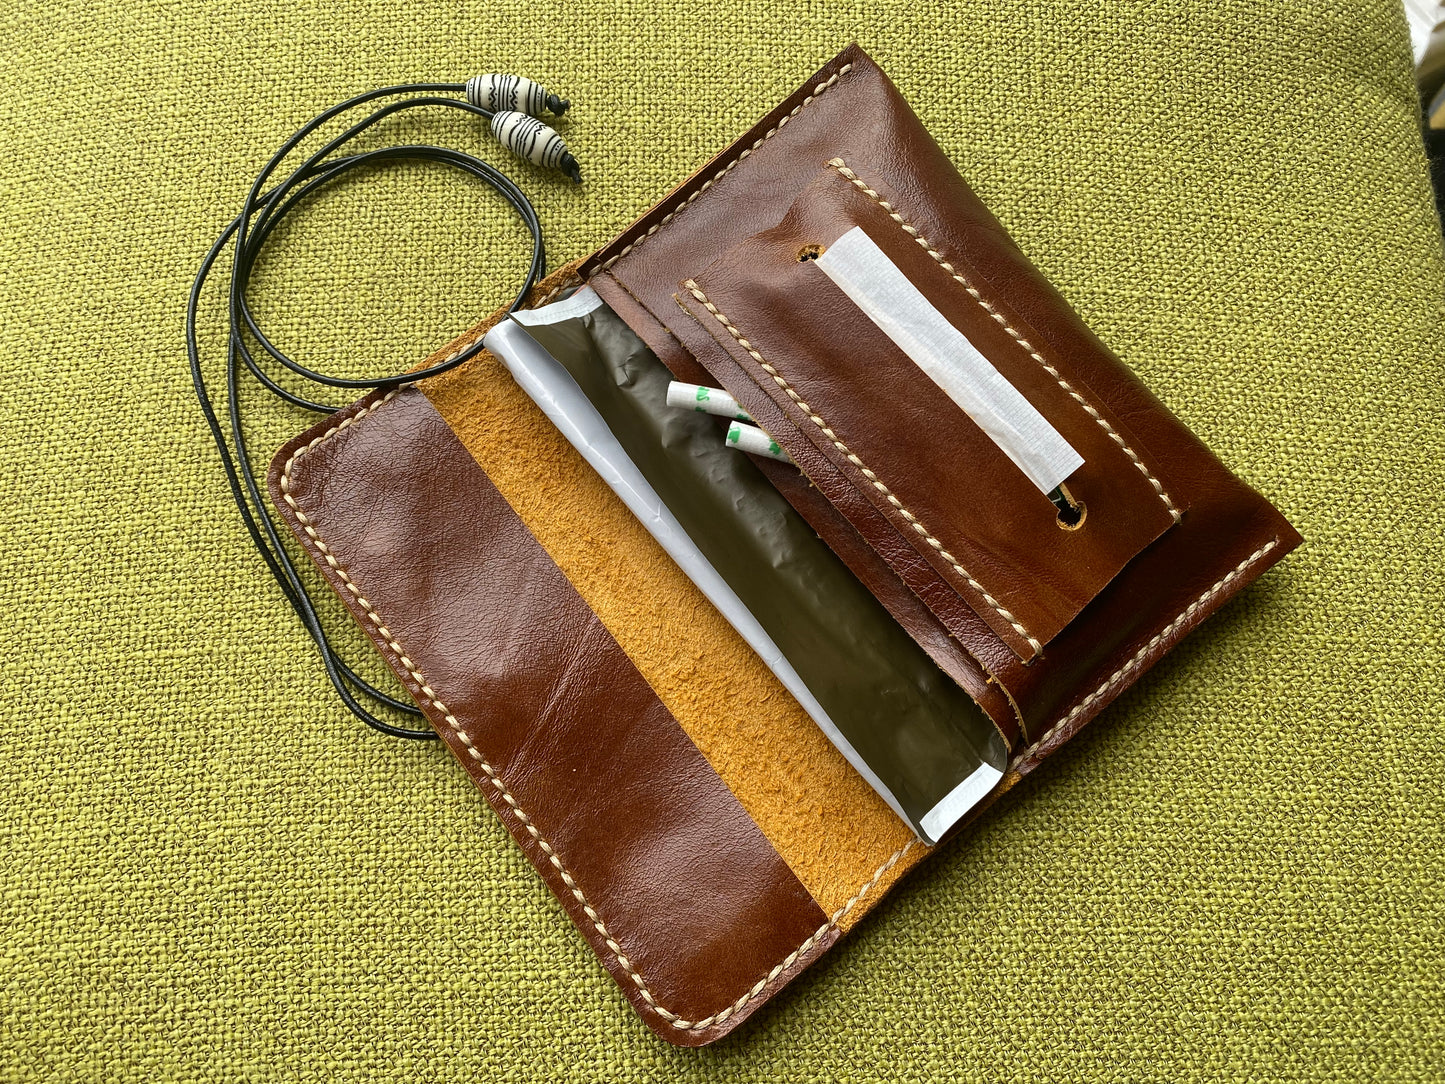 Handmade Leather Tobacco Pouch 30g